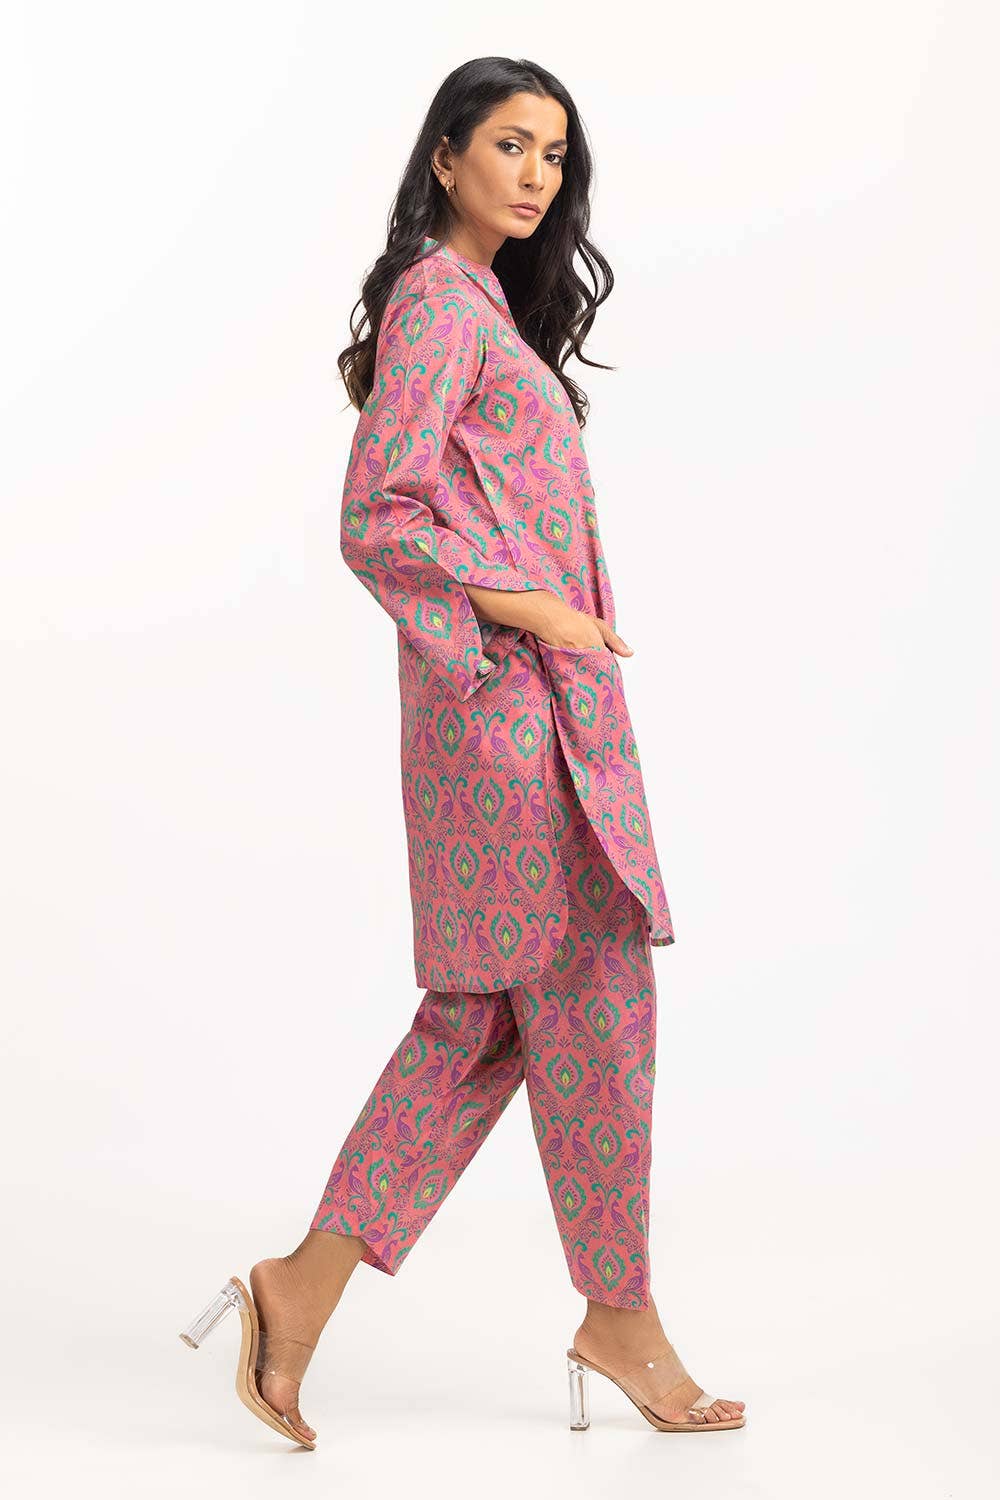 Gul Ahmed 02 Piece Stitched Digital Printed Cambric Embellished Shirt With Trouser IPS-23-120